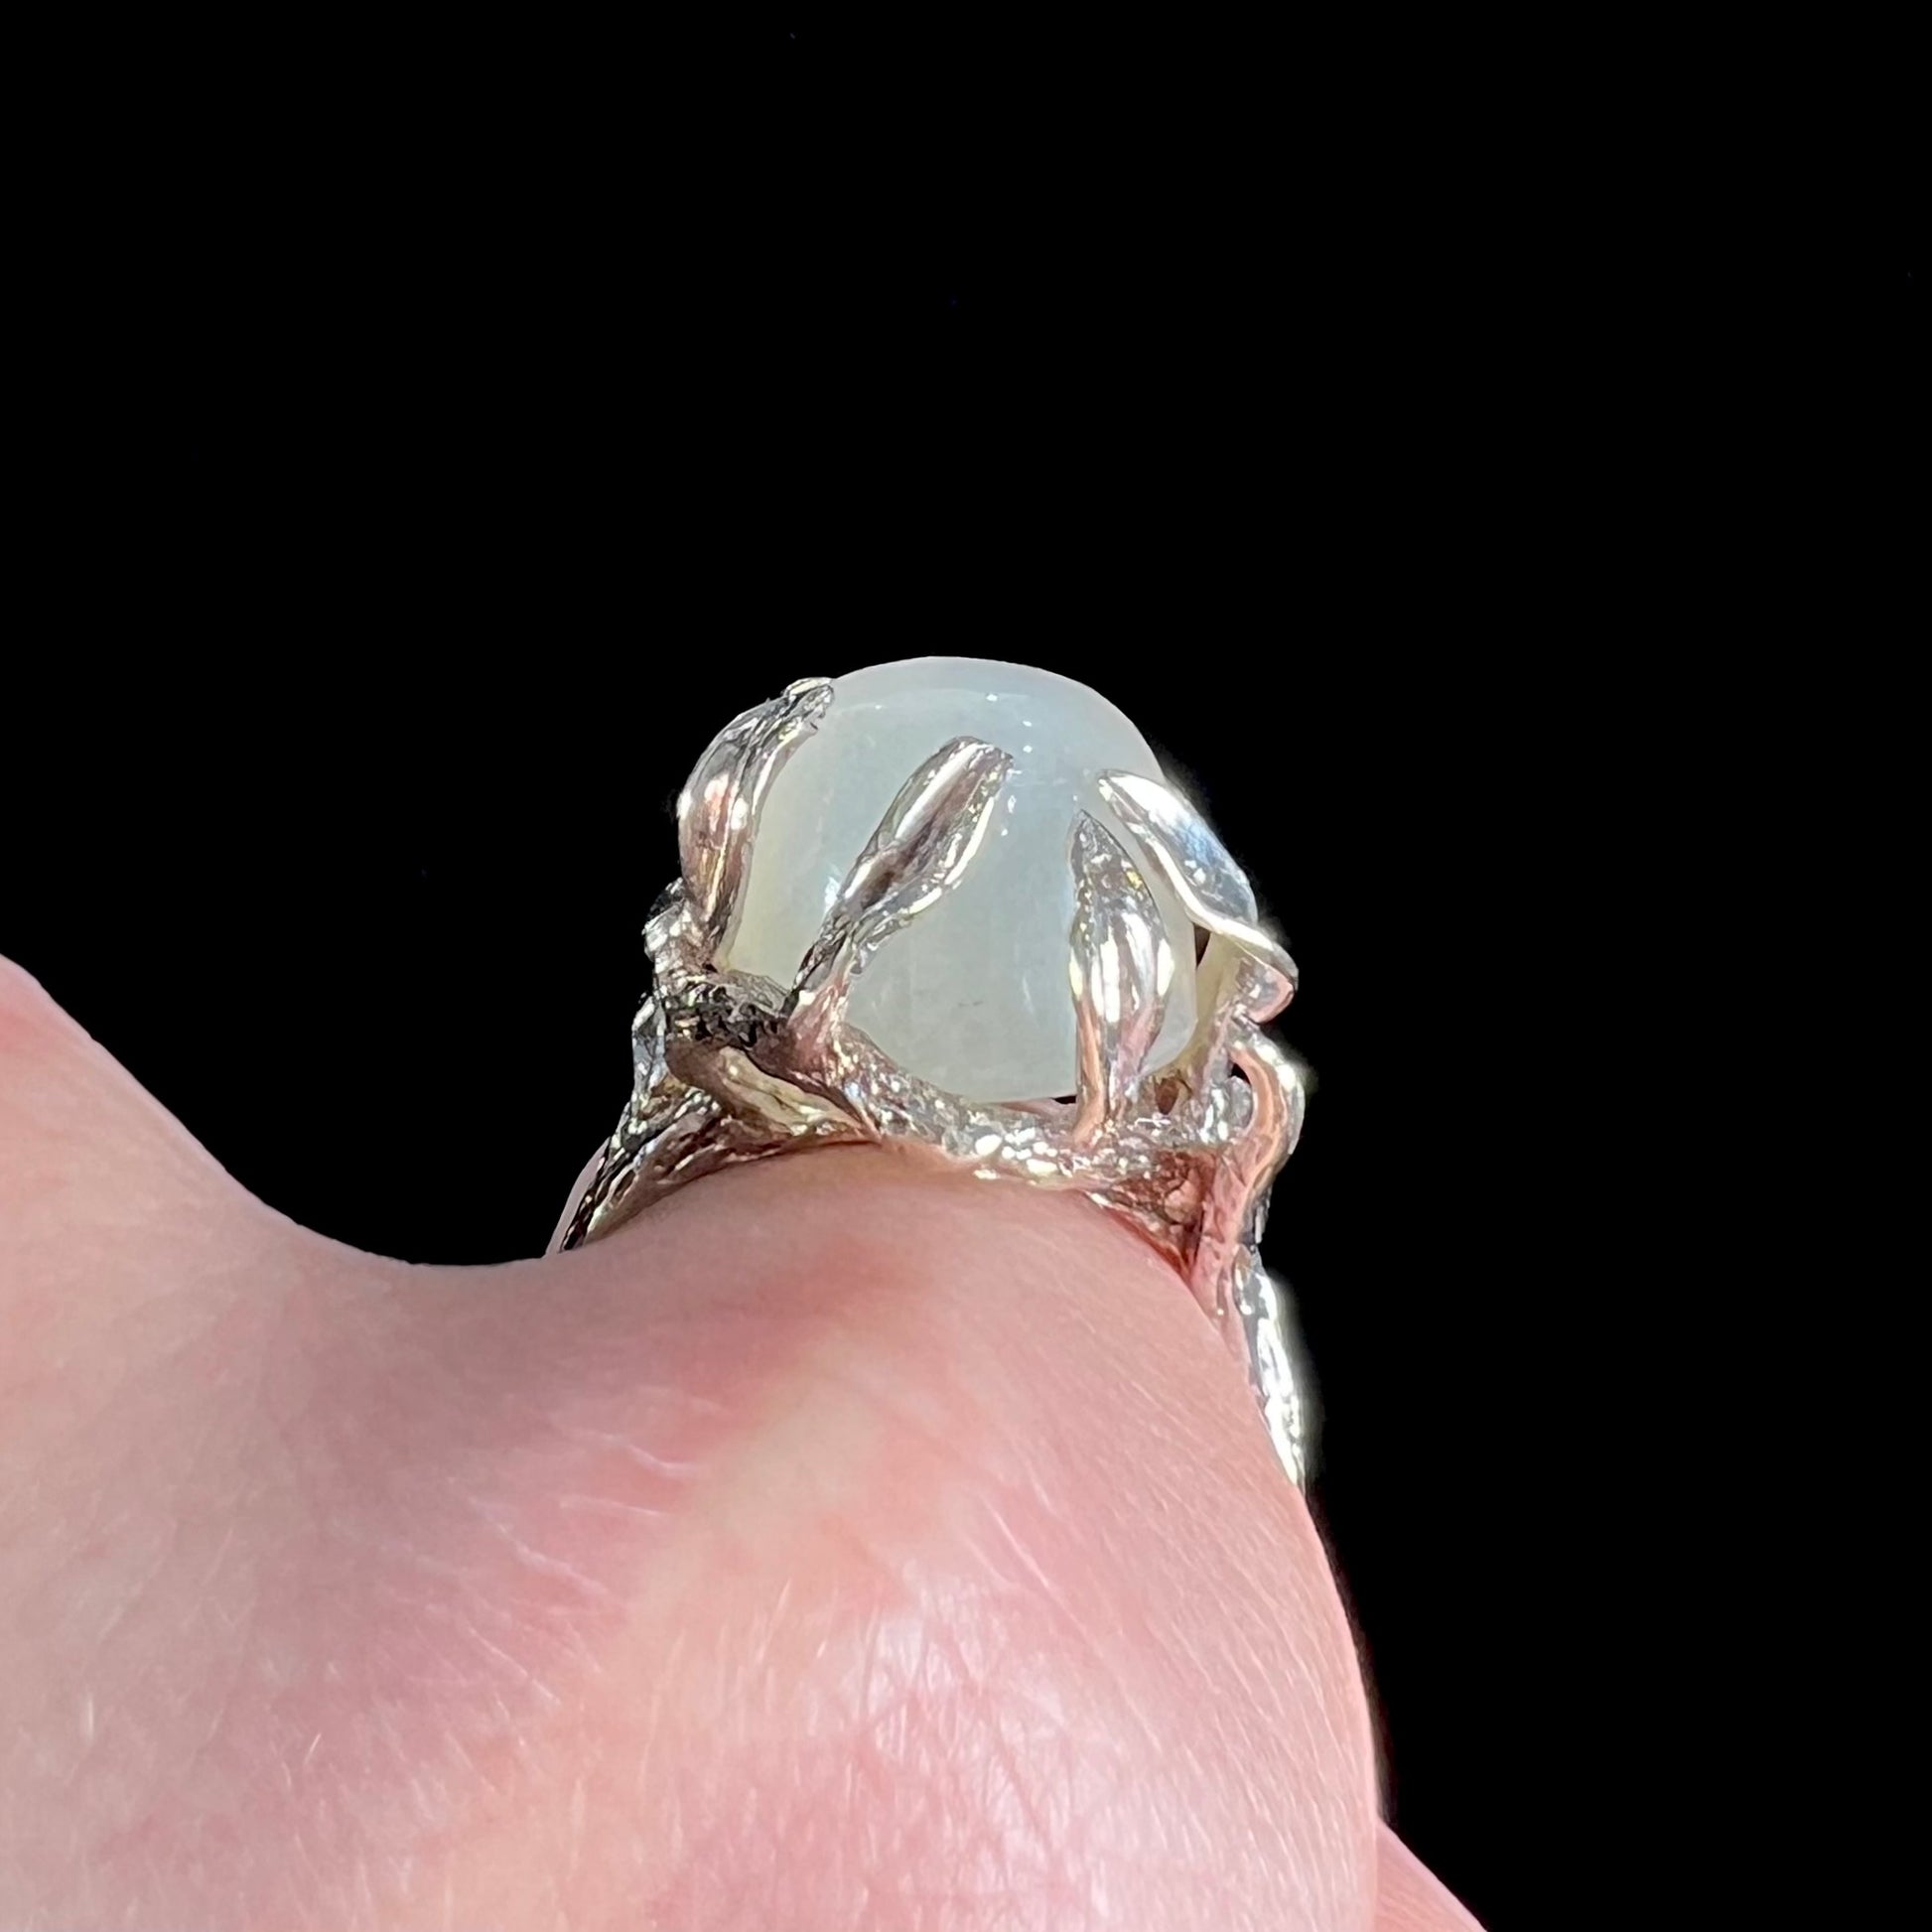 A ladies' organic style white gold moonstone ring.  The moonstone shows white adularescence on a creamy white body color.  Prongs resemble leaves holding the stone.